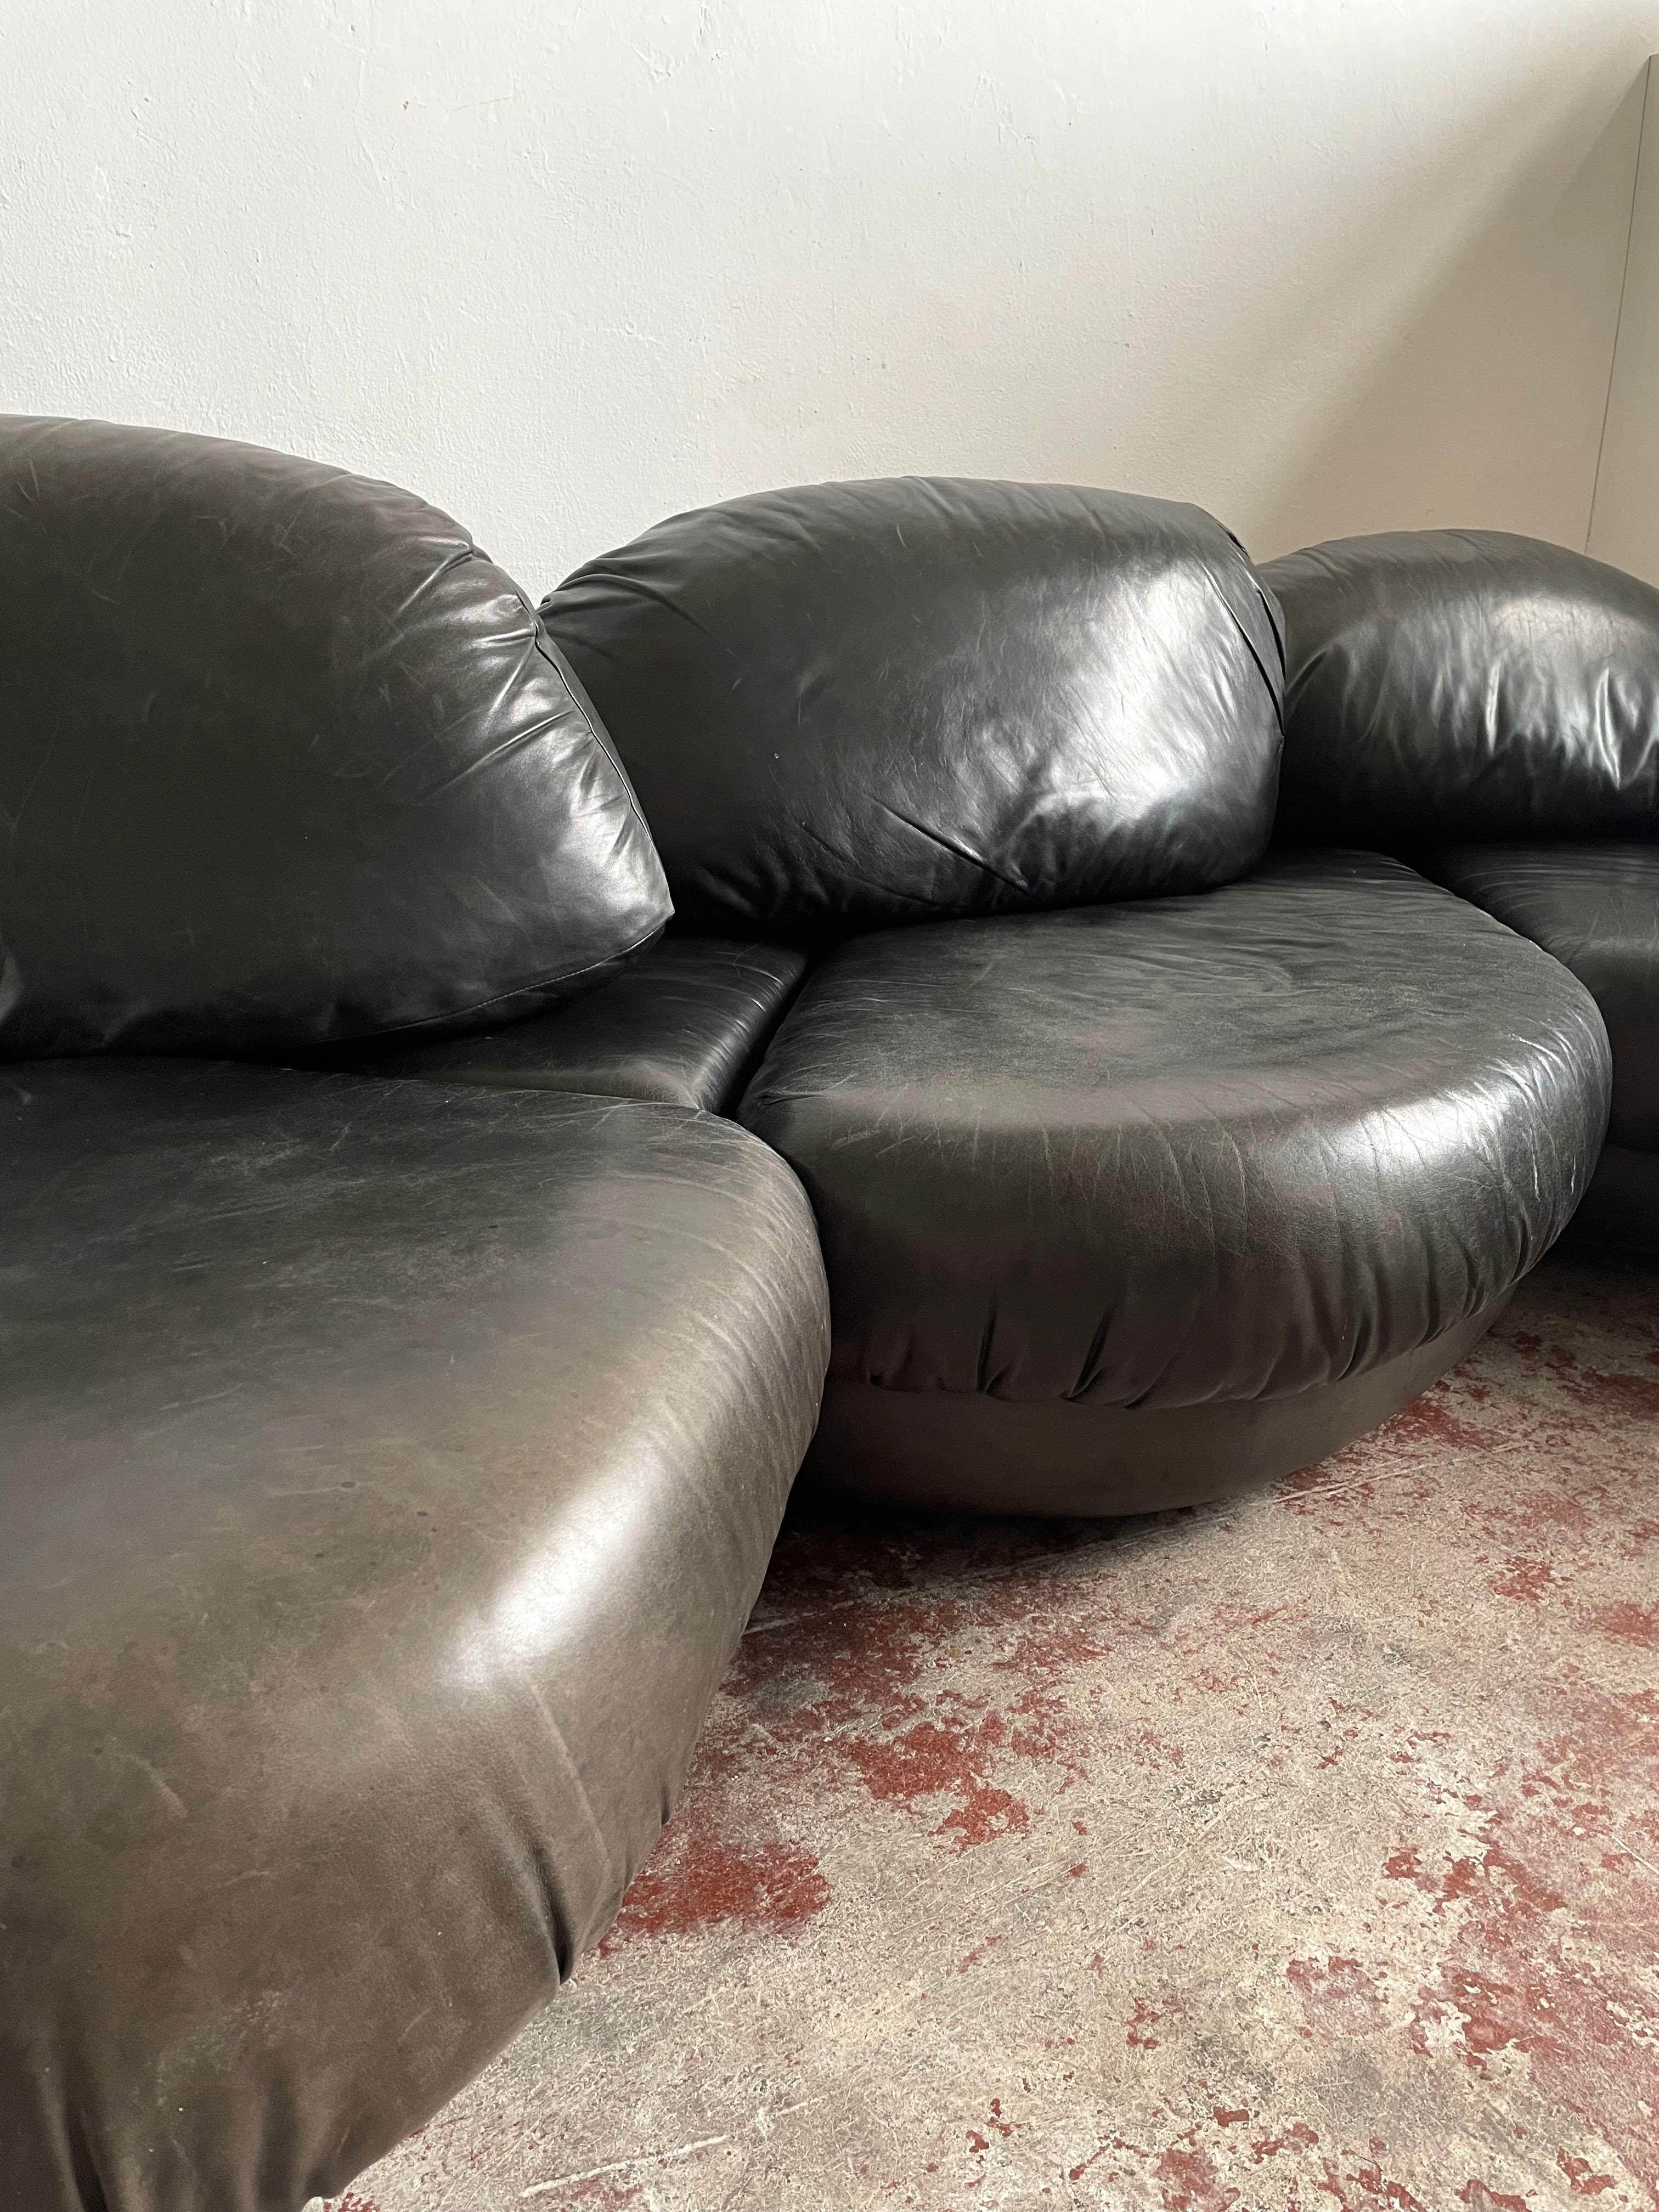 Very rare sectional sofa manufactured in the 1970s by Wiener Werkstätten

The sofa consists of 4 interconnected segments that create a stunning sculptural, organic form, upholstered in soft, silky, top-notch quality black leather in great vintage